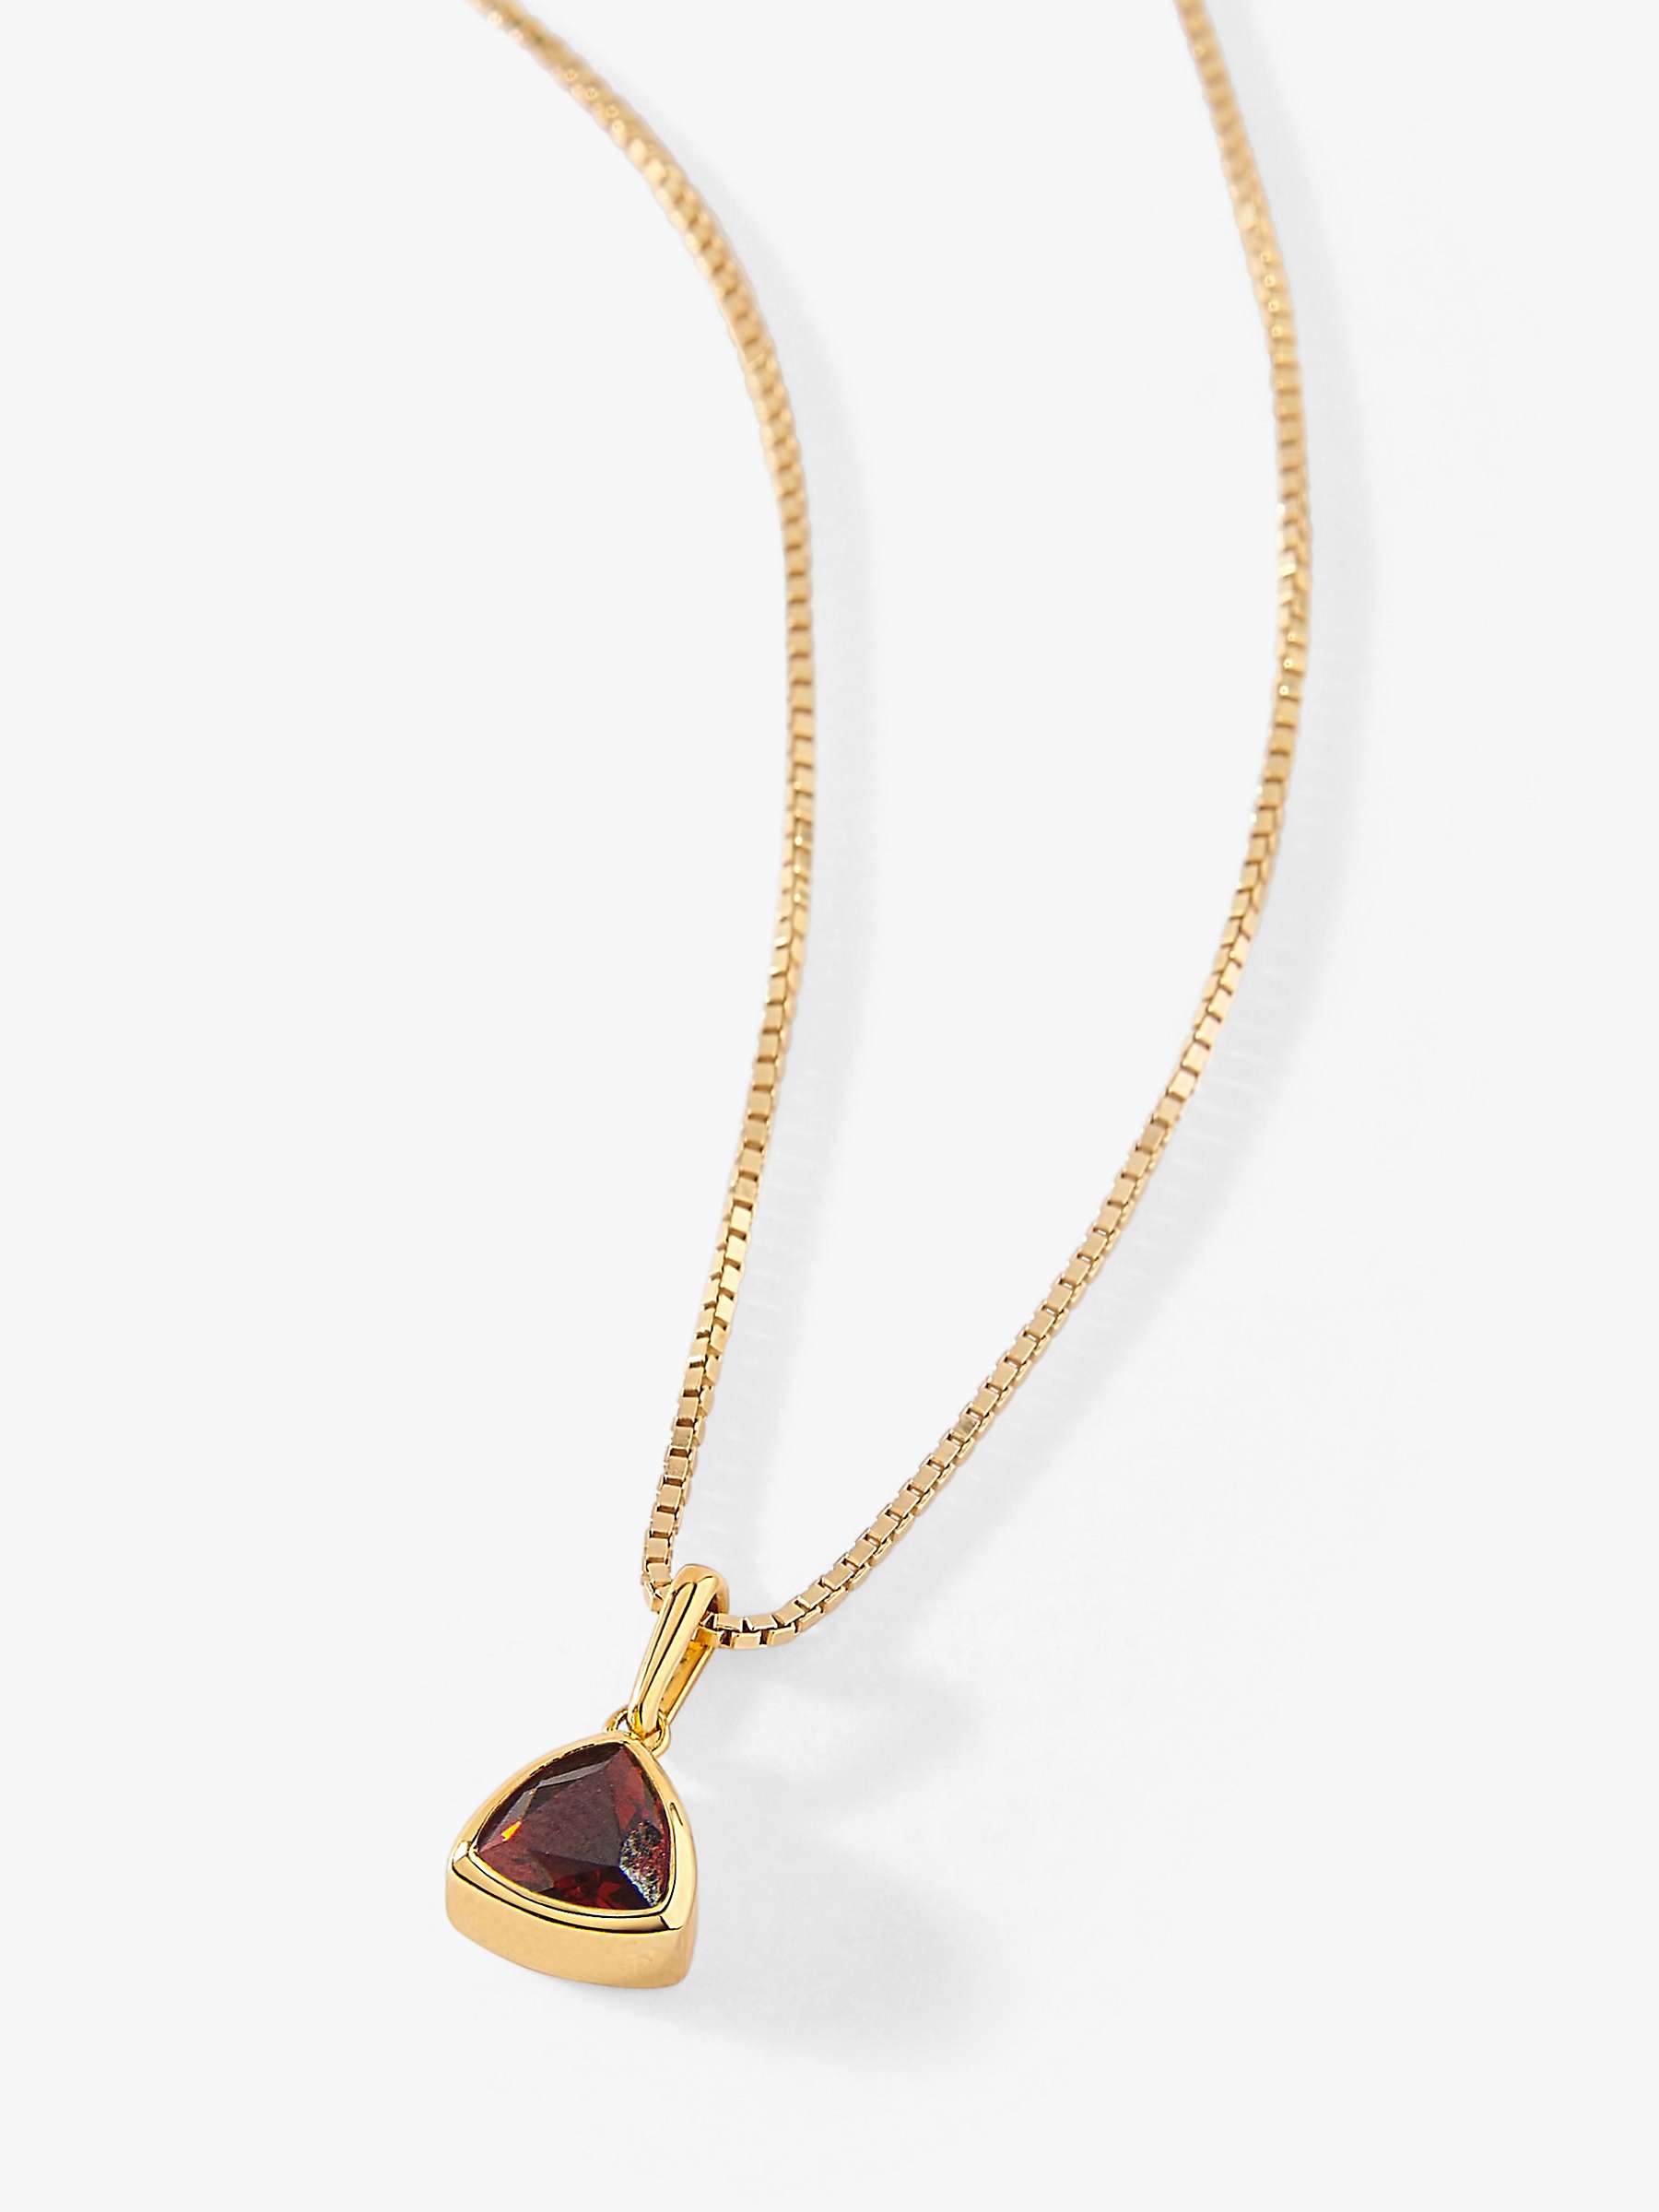 Buy Edge of Ember Triangle Gemstone Pendant Necklace Online at johnlewis.com